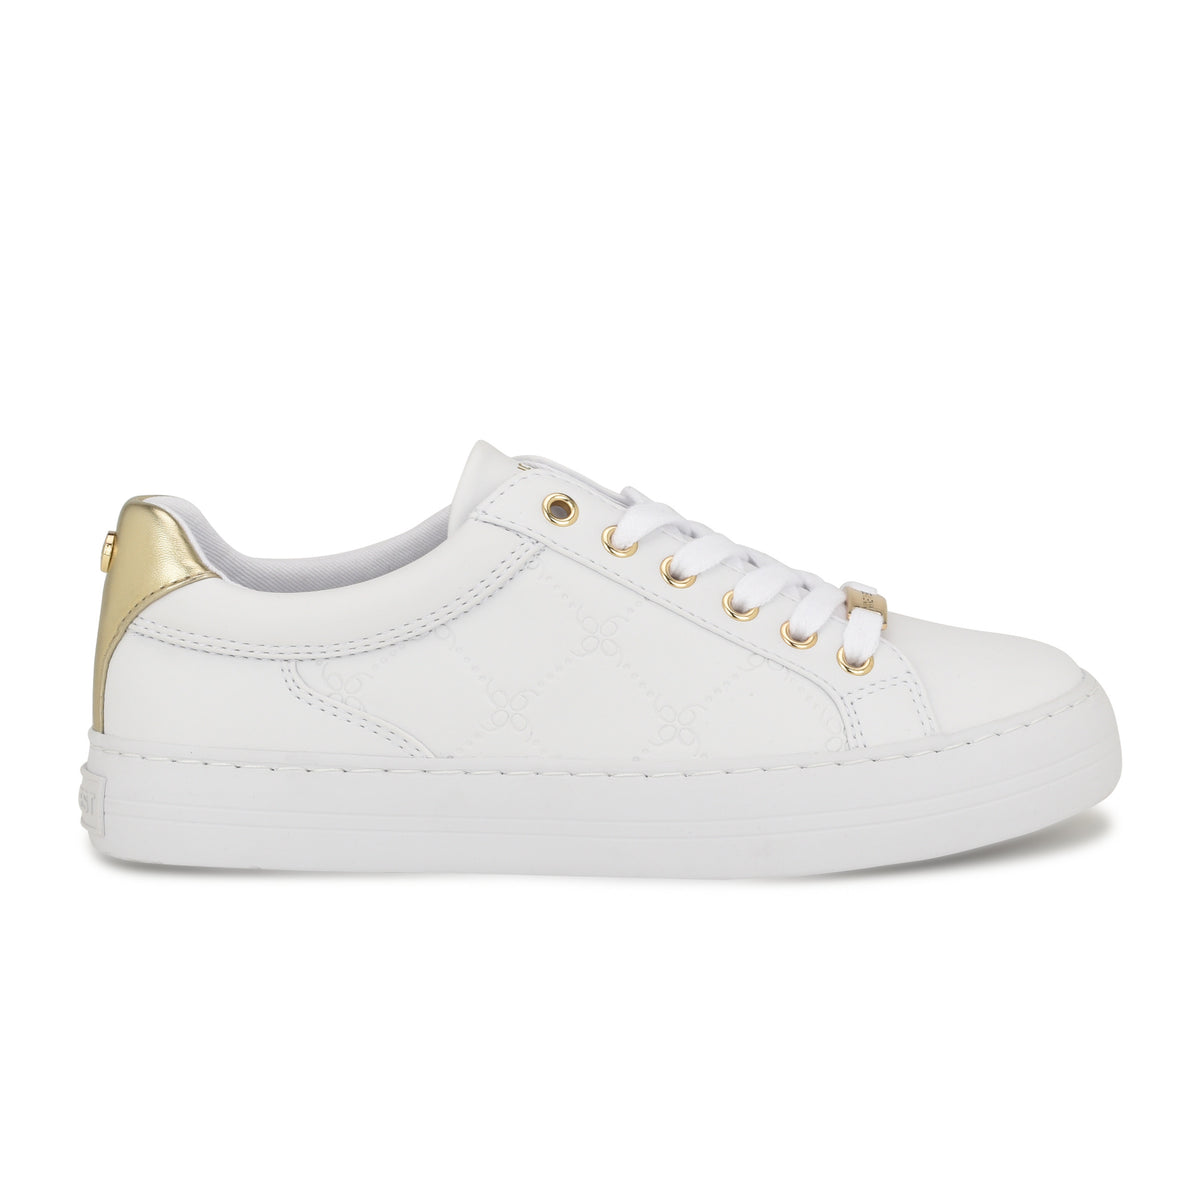 Givens Laceup Sneakers